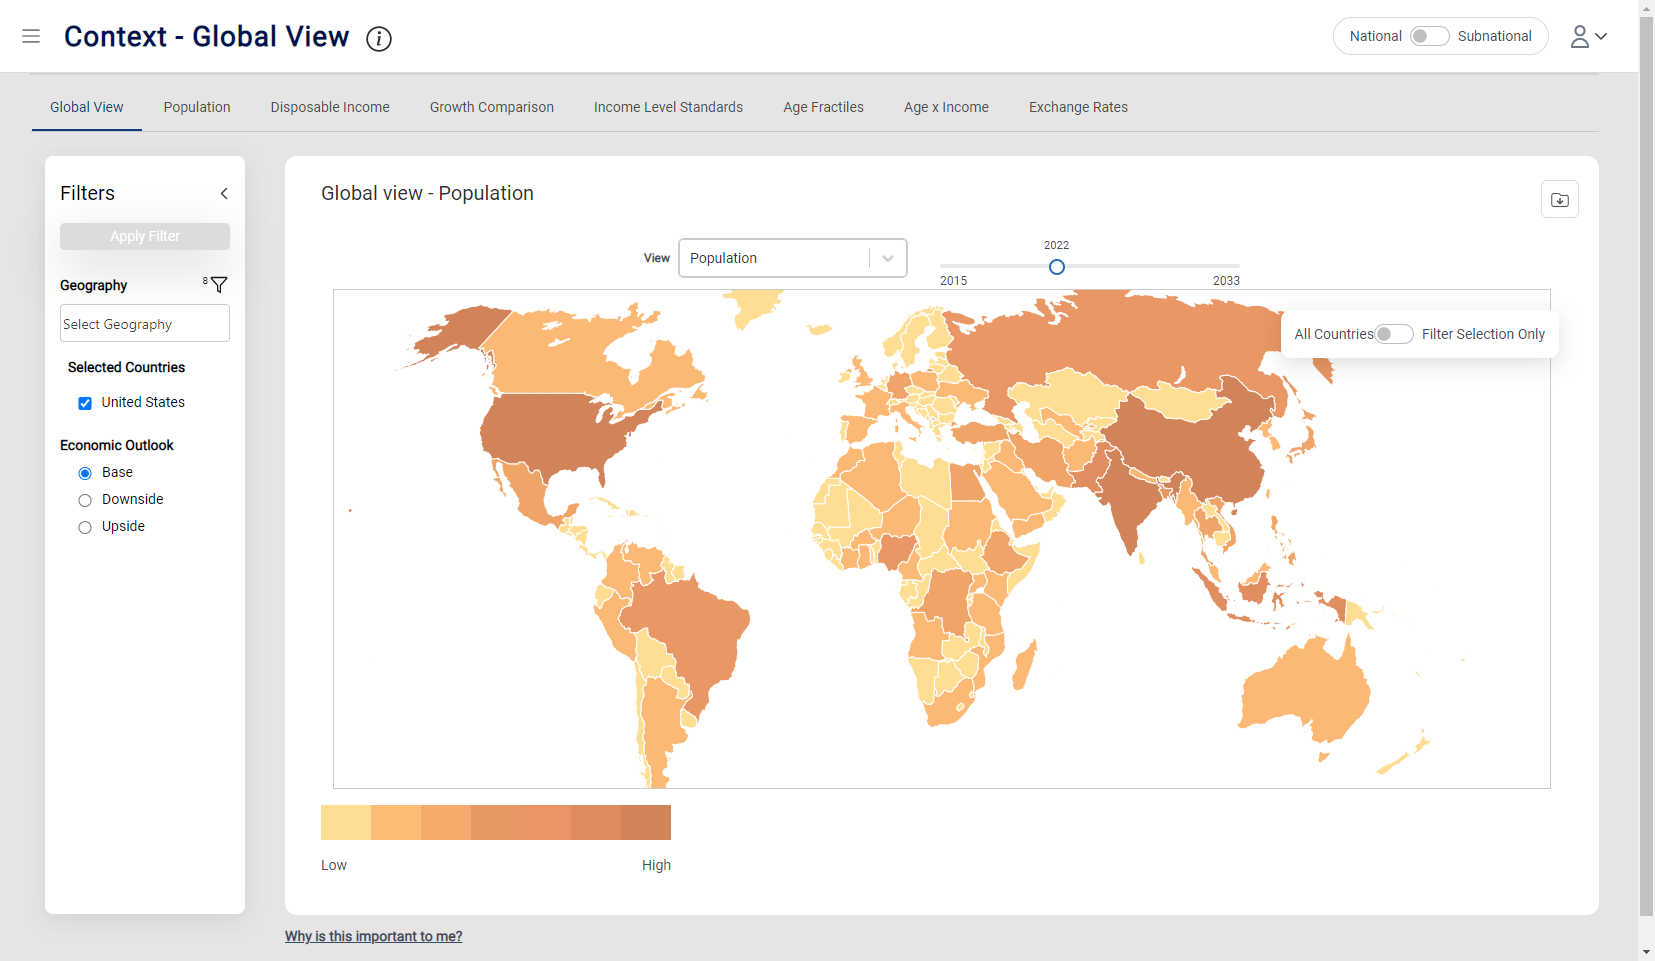 Explore contextual data including population, GDP and income for over 200 countries.